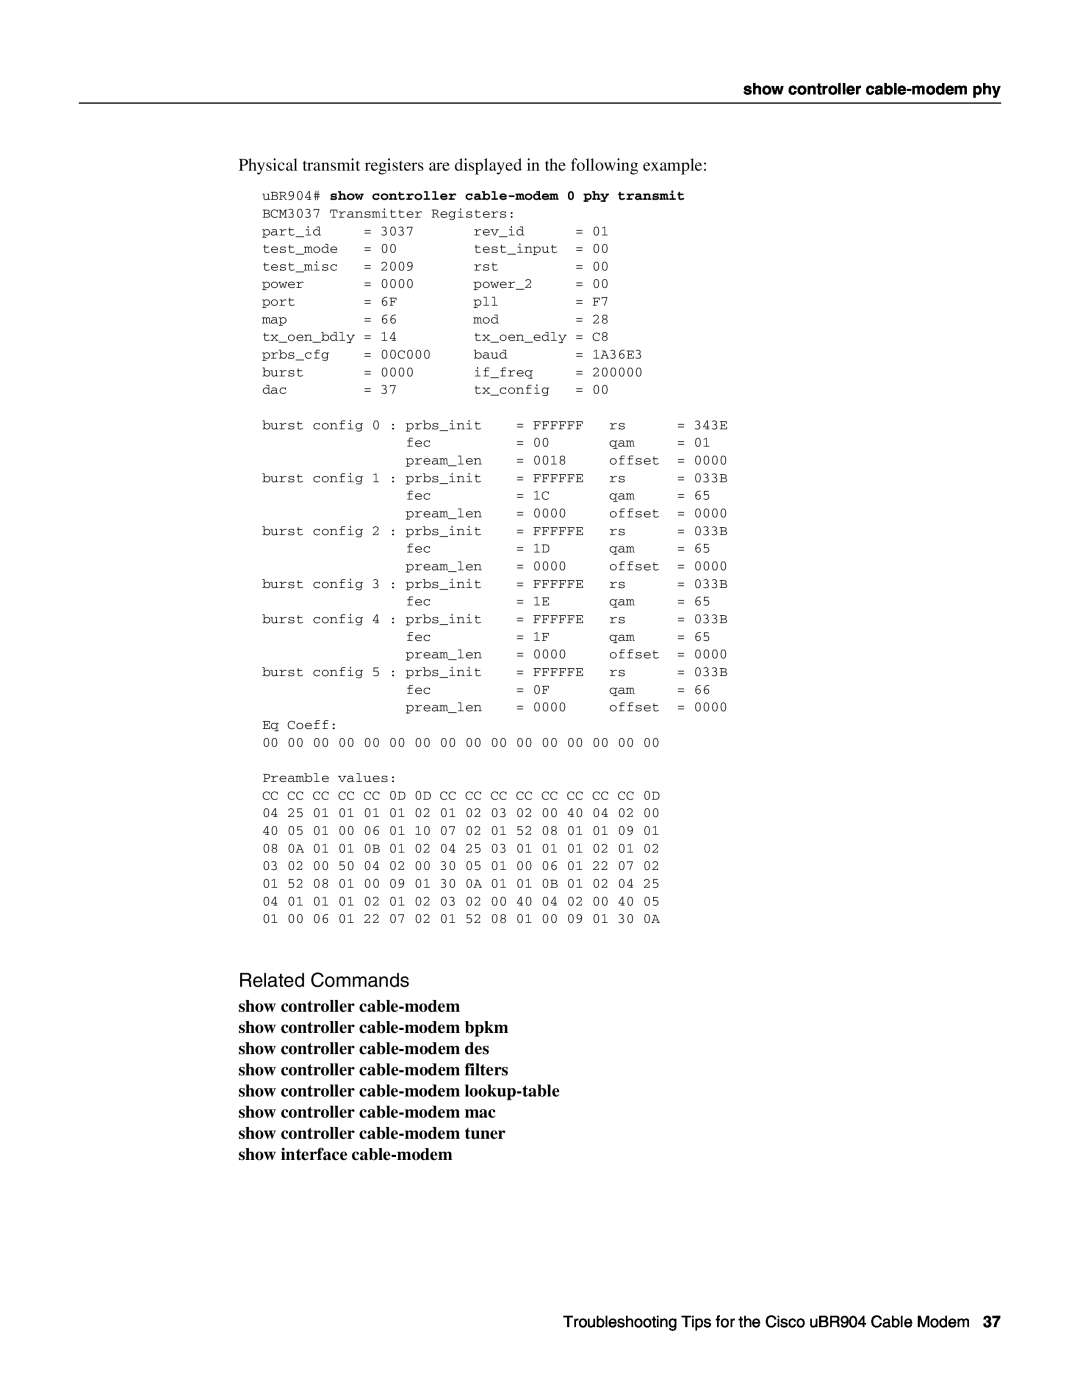 Cisco Systems UBR904 manual Related Commands, Physical transmit registers are displayed in the following example 